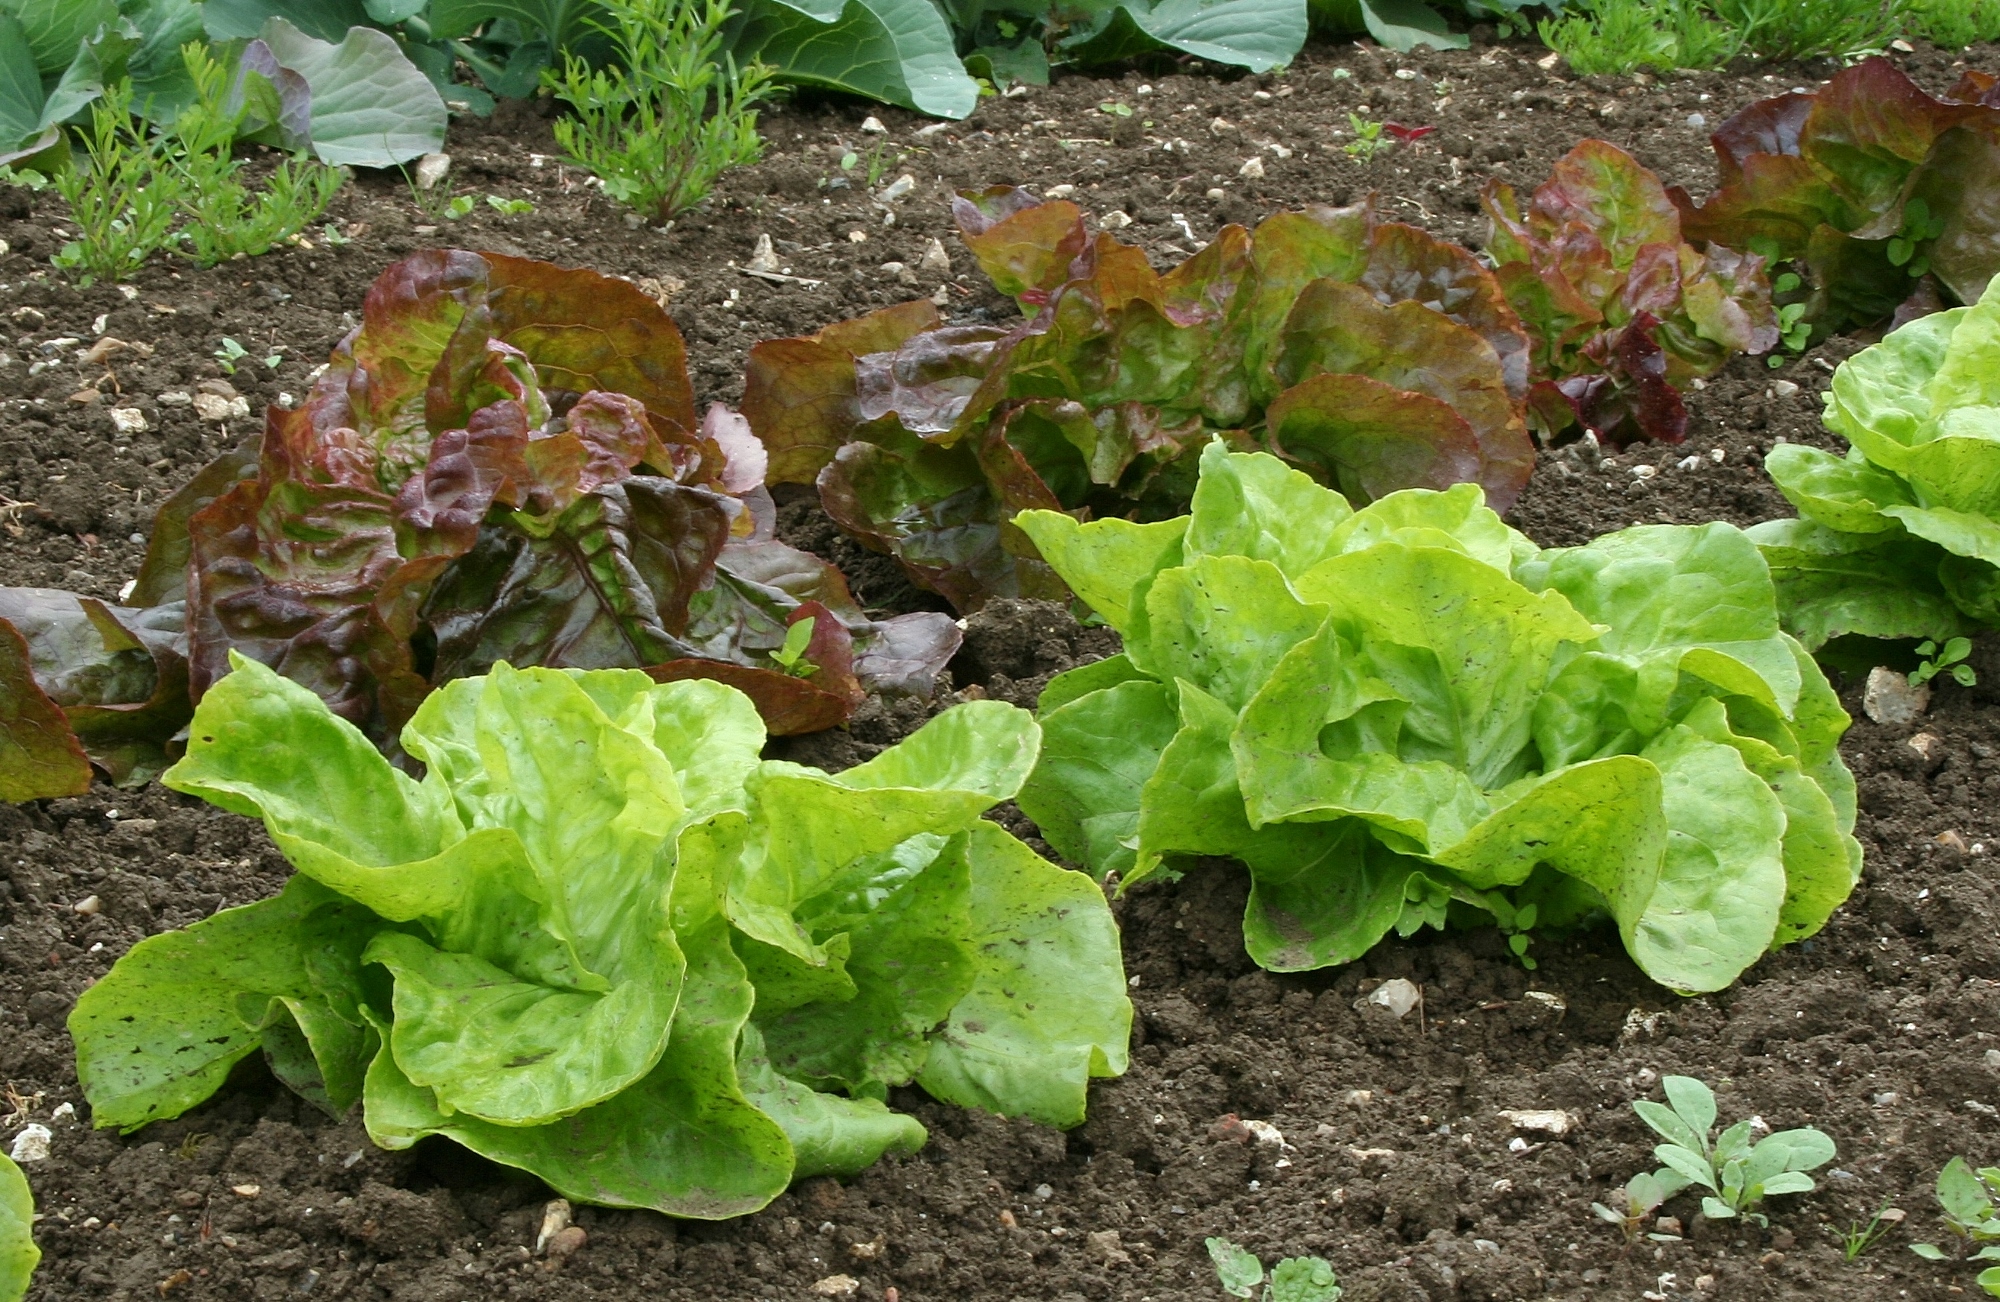 A row of lettuces